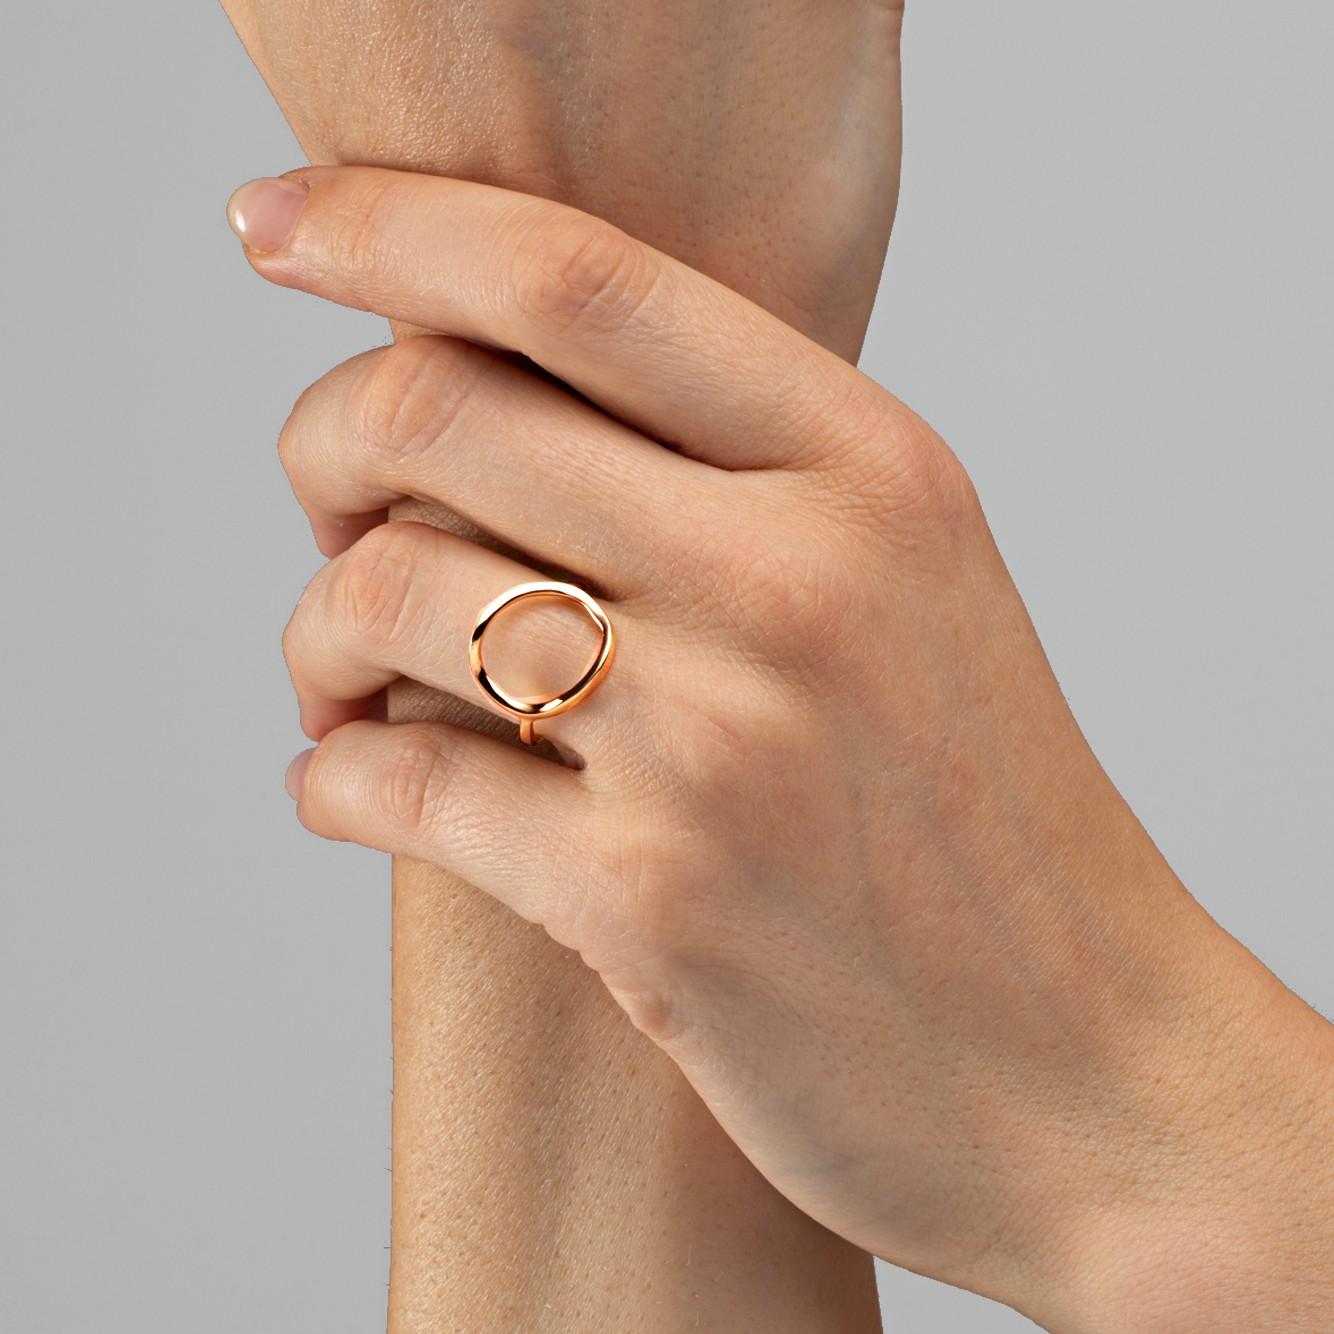 Alex Jona design collection, hand crafted in Italy, open circle hoop ring in 18 karat rose gold. Ring size 6, can be sized.
A classic design with a beautiful meaning, for those of you who want to make a bit of a statement. In Japanese culture, an